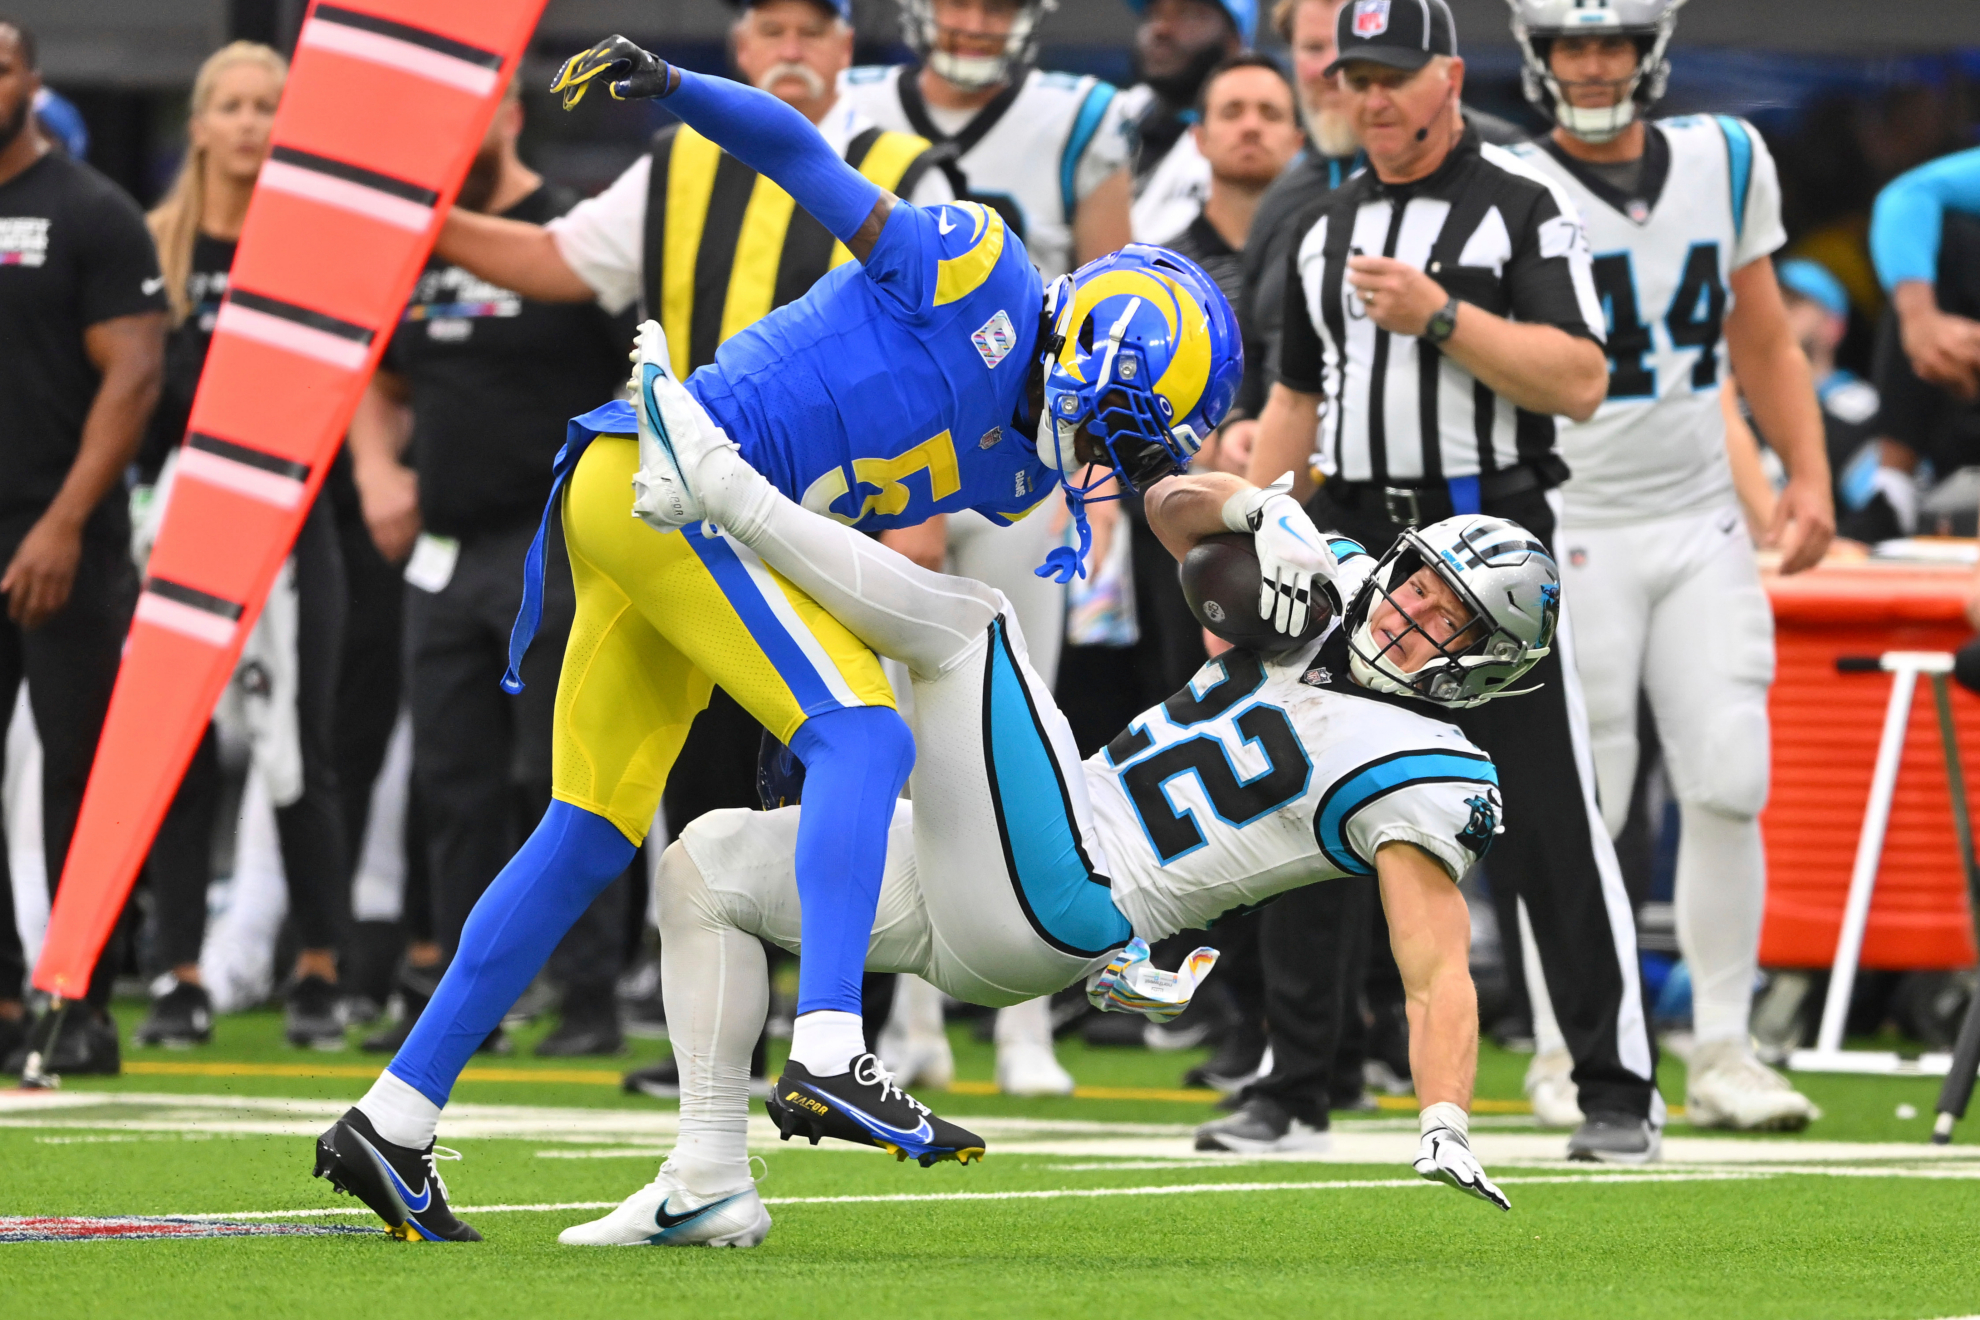 Jalen Ramsey tackles Christian McCaffrey during their most recent game in the NFL.